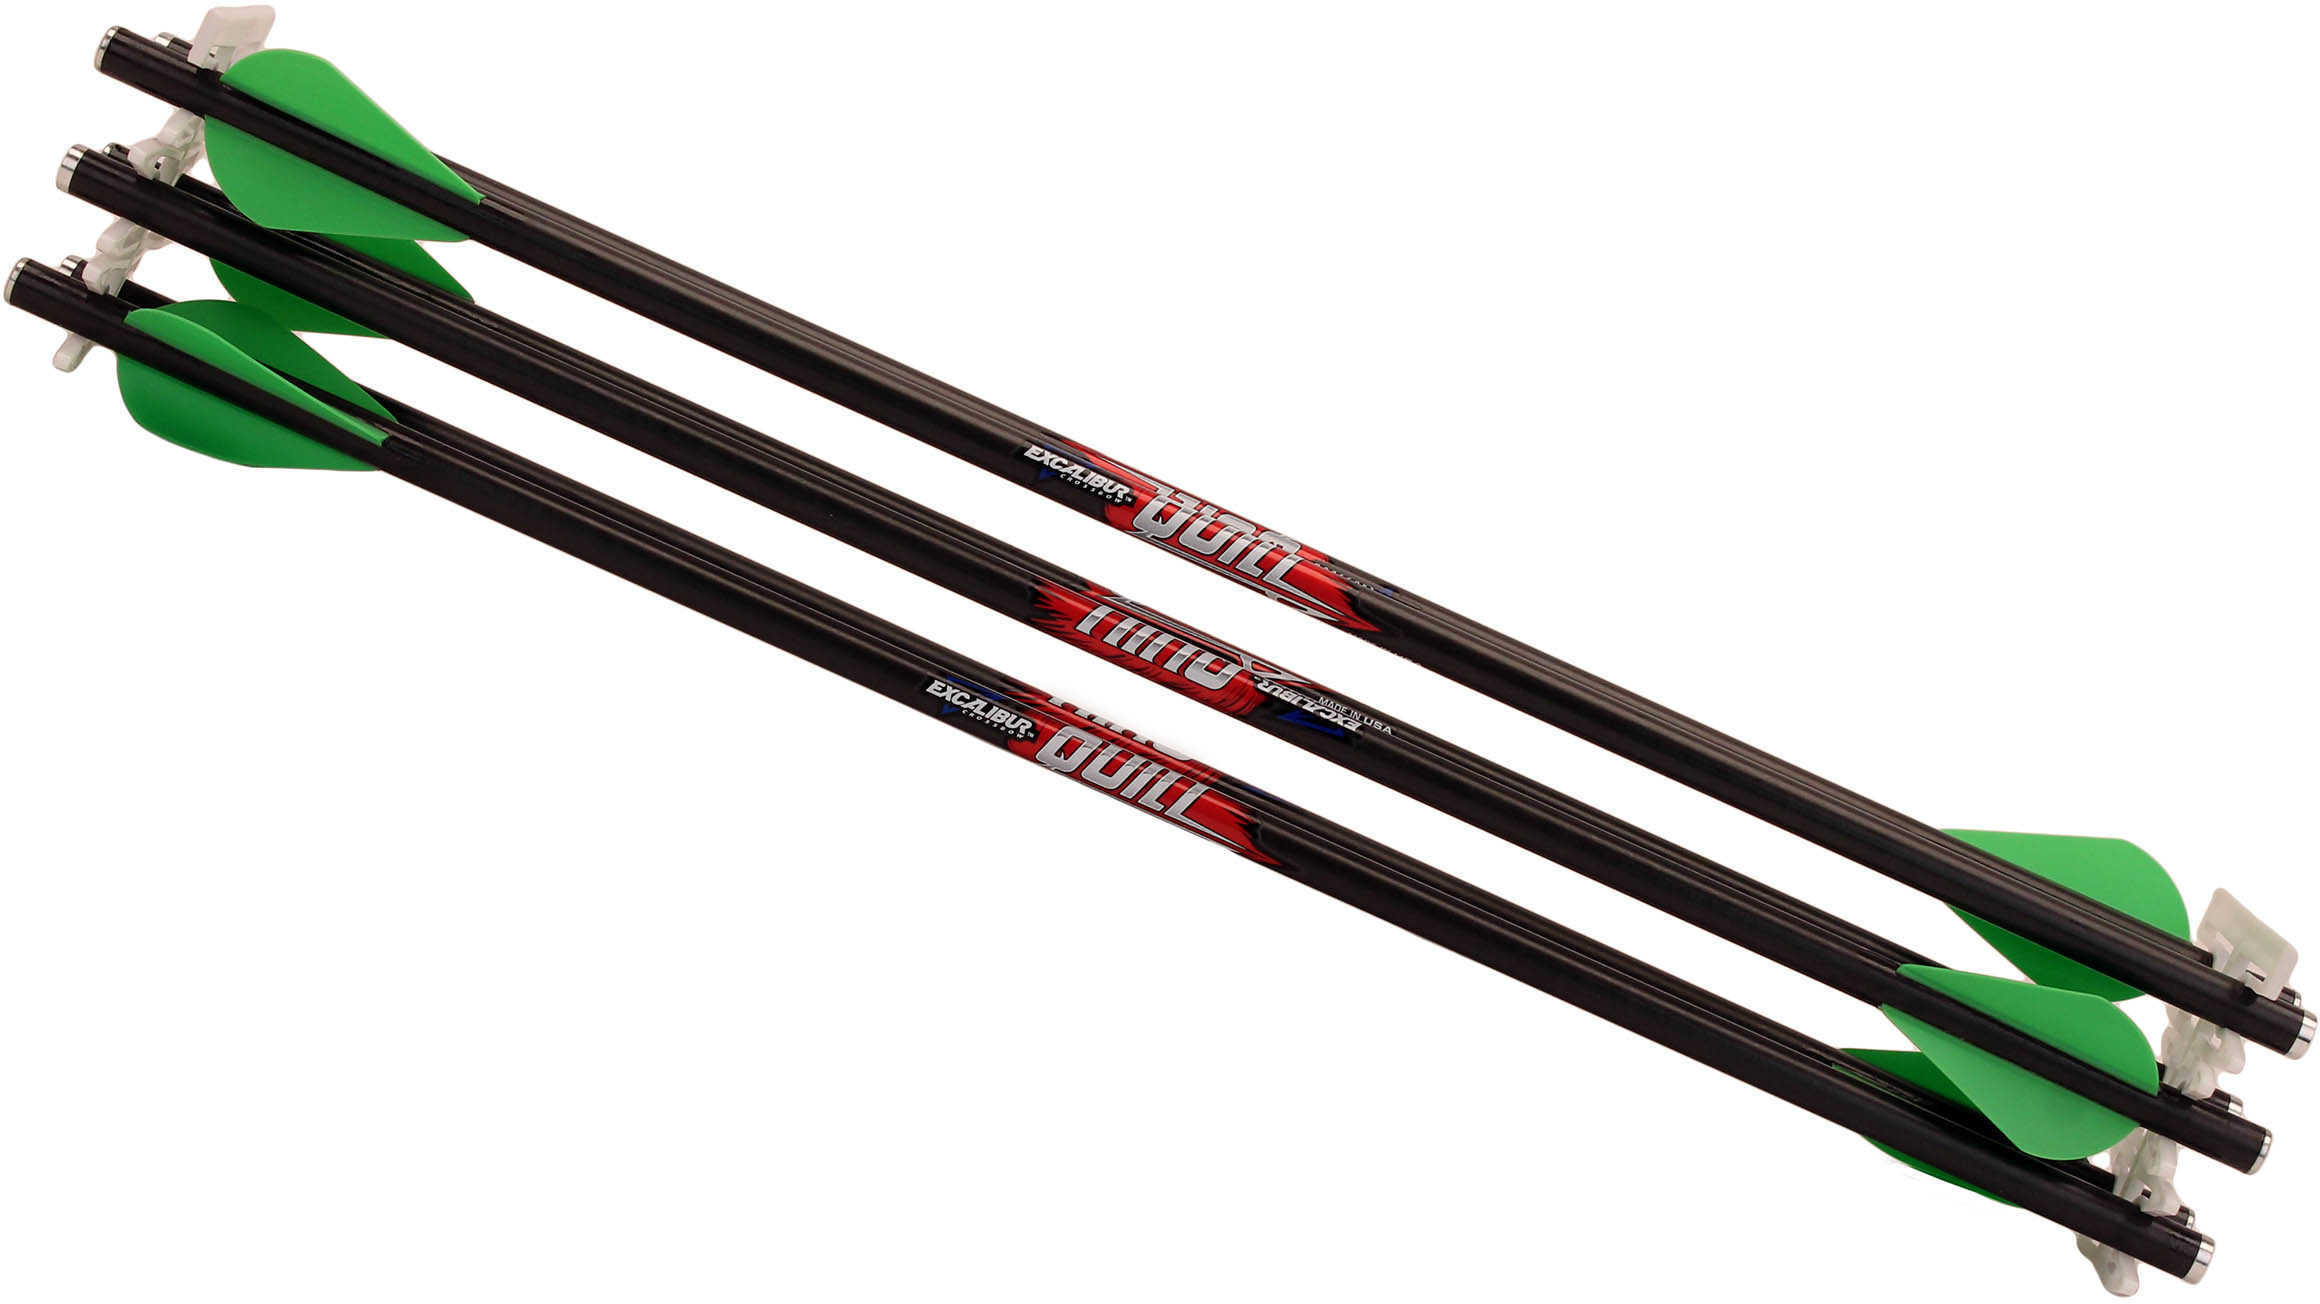 Excalibur Quill 16.5" Carbon Arrows - (Package Of 6) Md: 22QV16-6